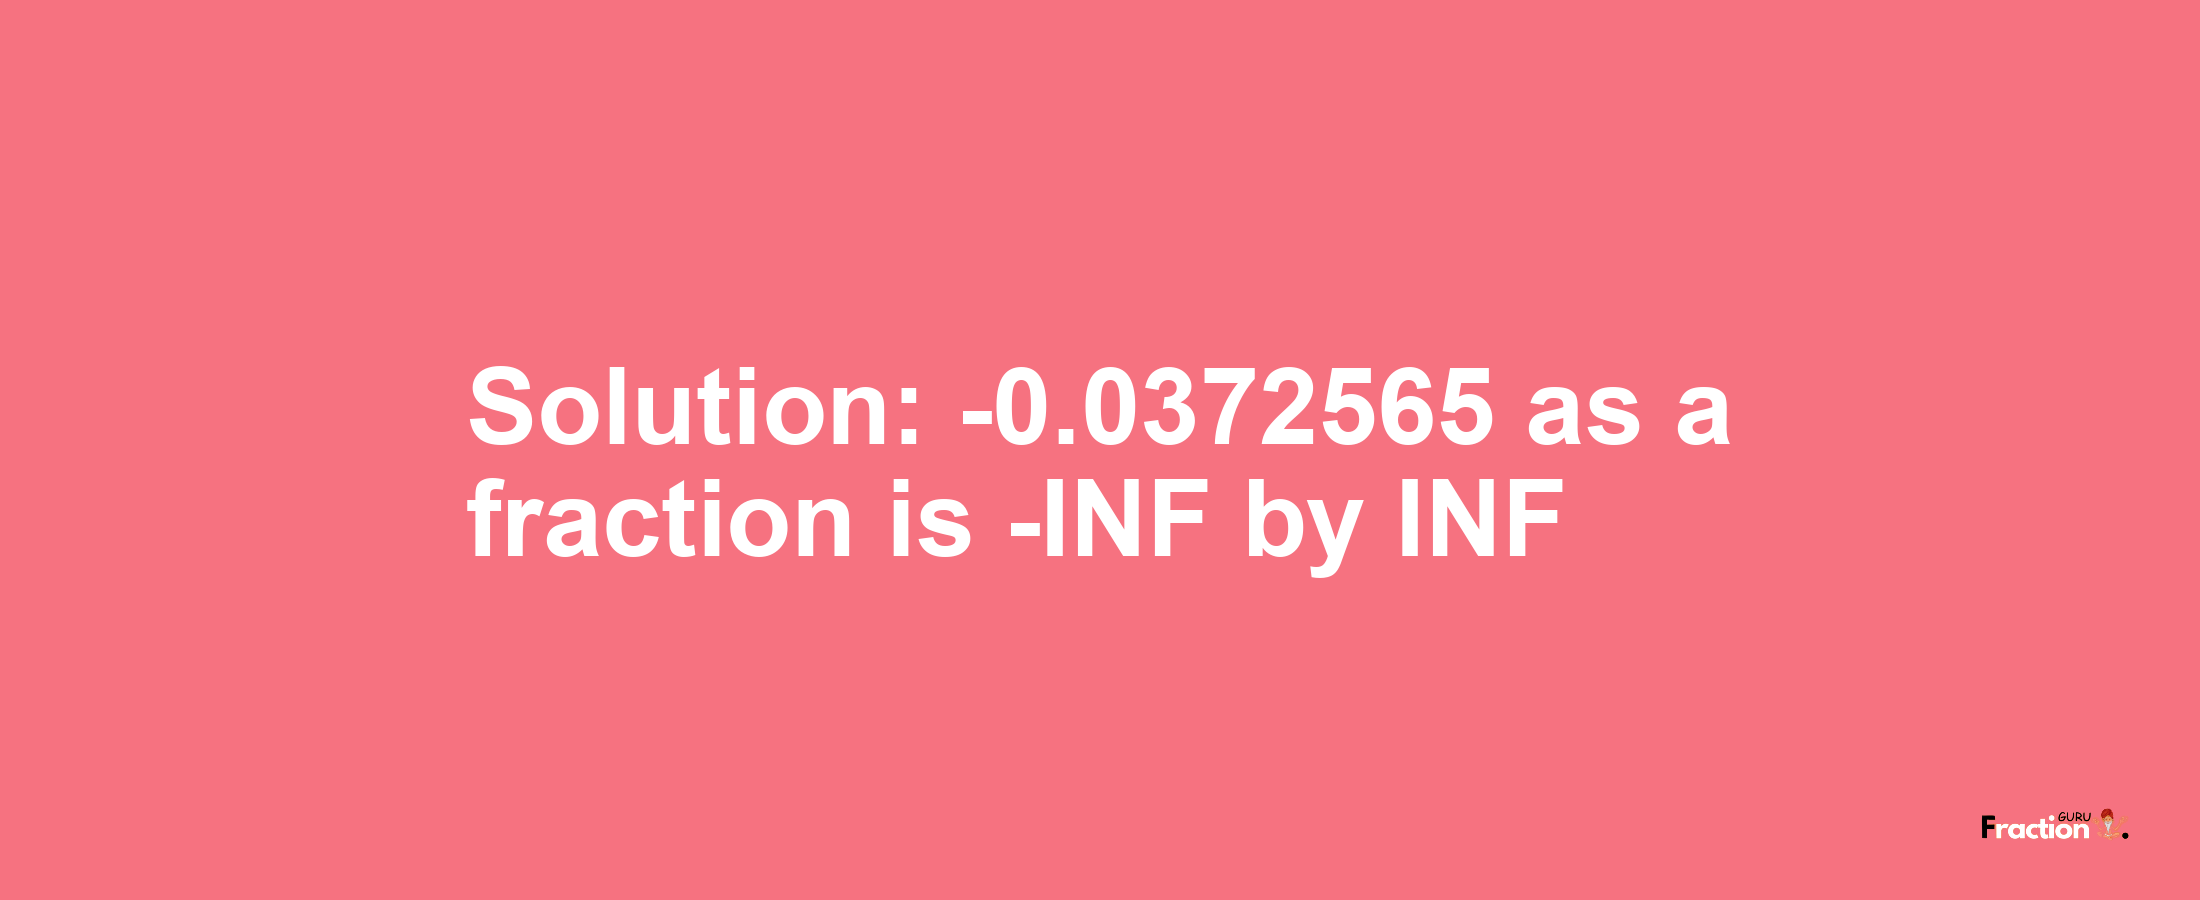 Solution:-0.0372565 as a fraction is -INF/INF